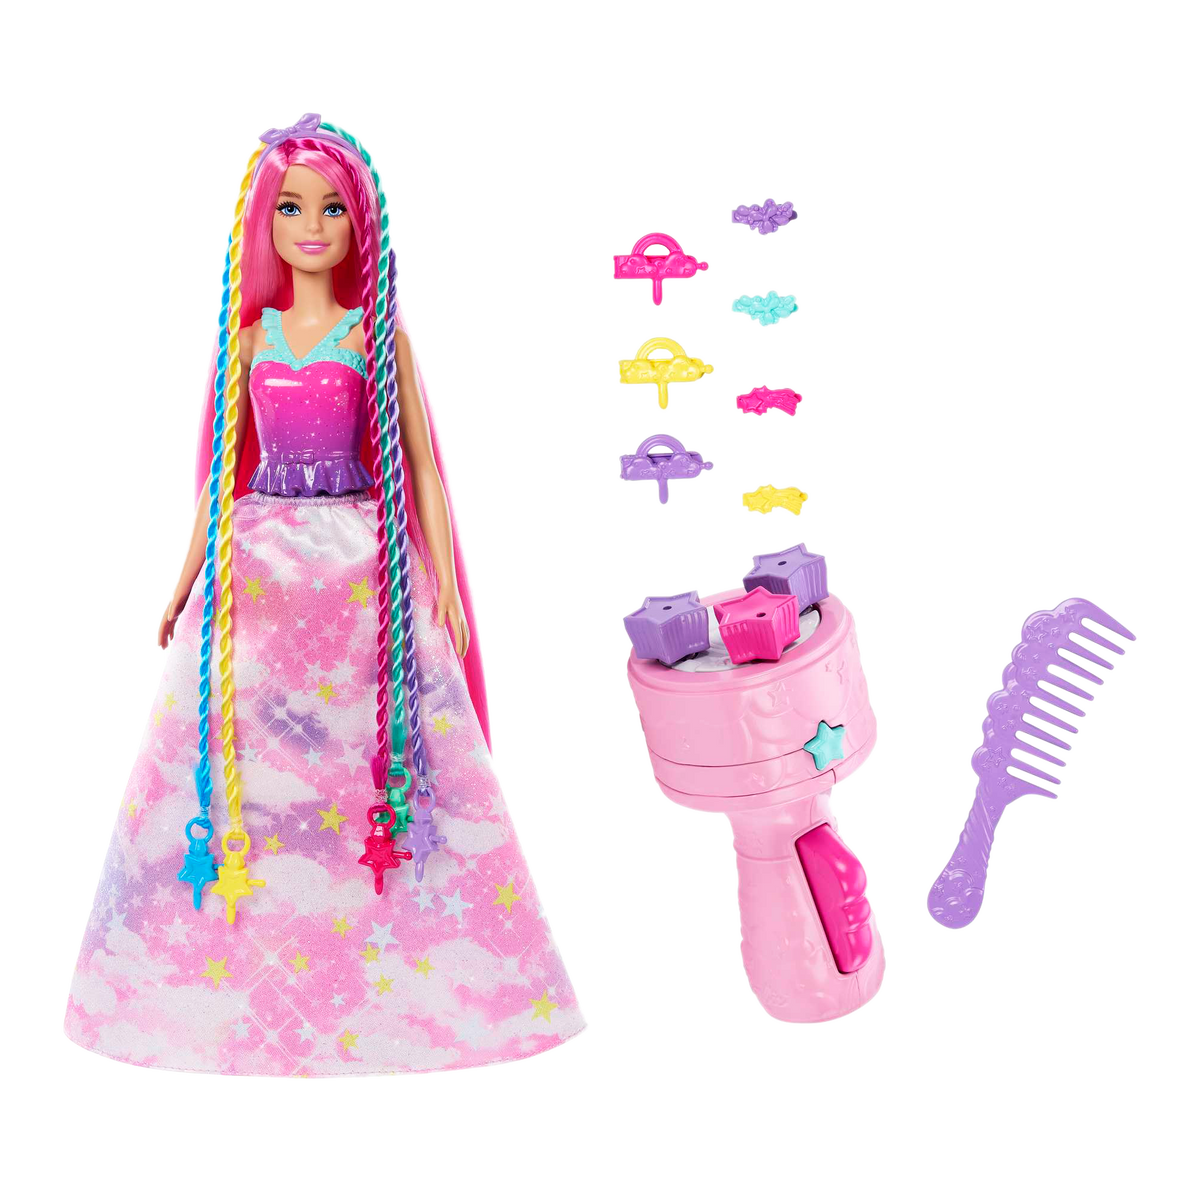 Barbie Dreamtopia Twist â€˜n Style Doll and Accessories – Shop